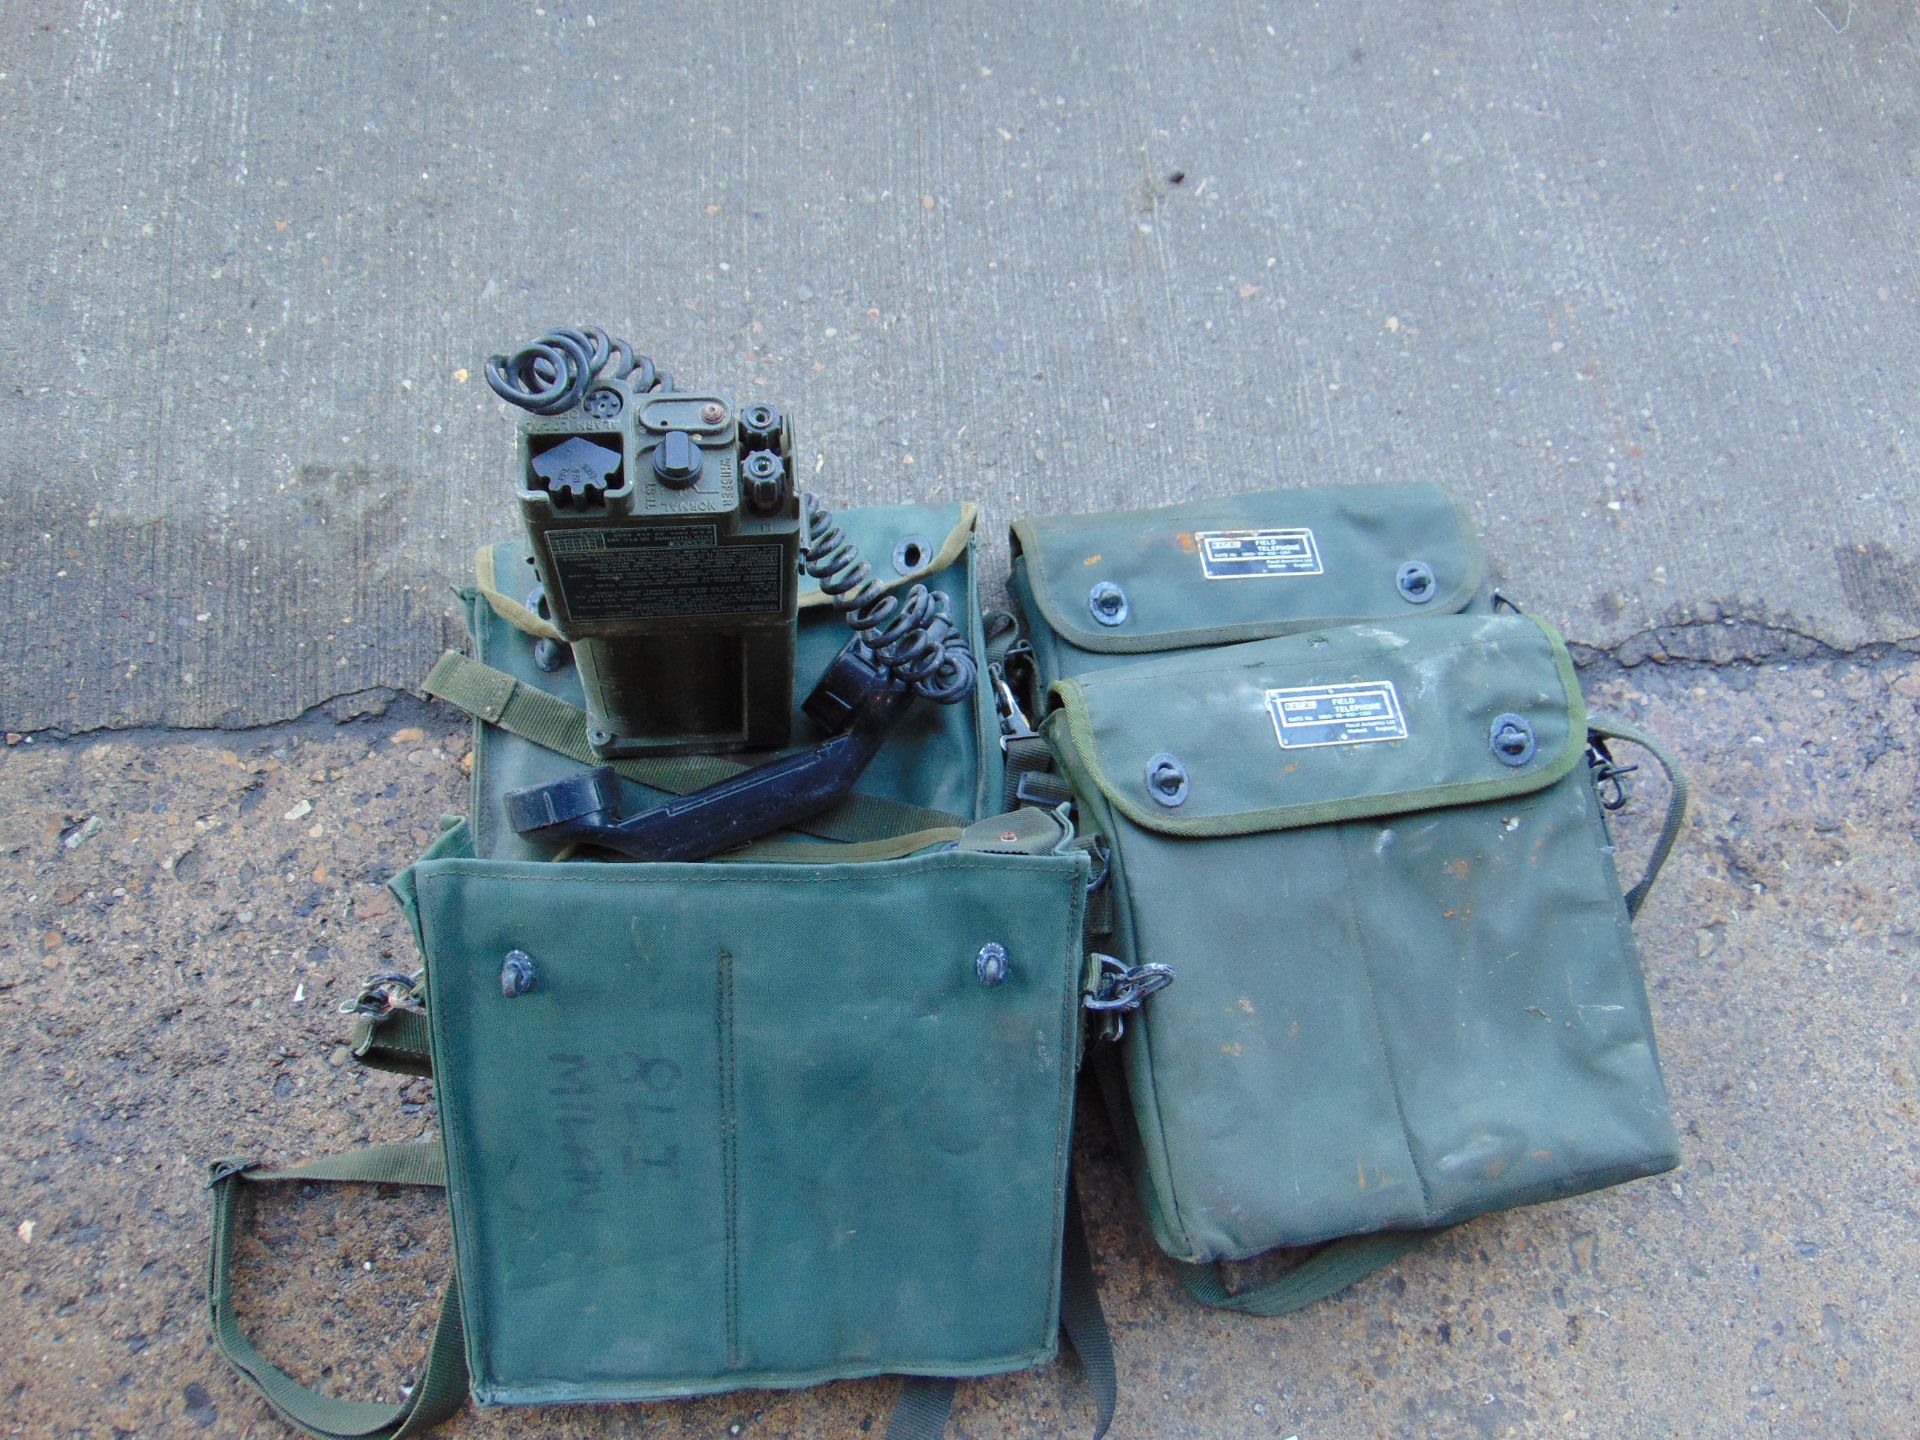 4x RACAL UK/PTC 404 Field Telephones in Pouches - Image 2 of 4